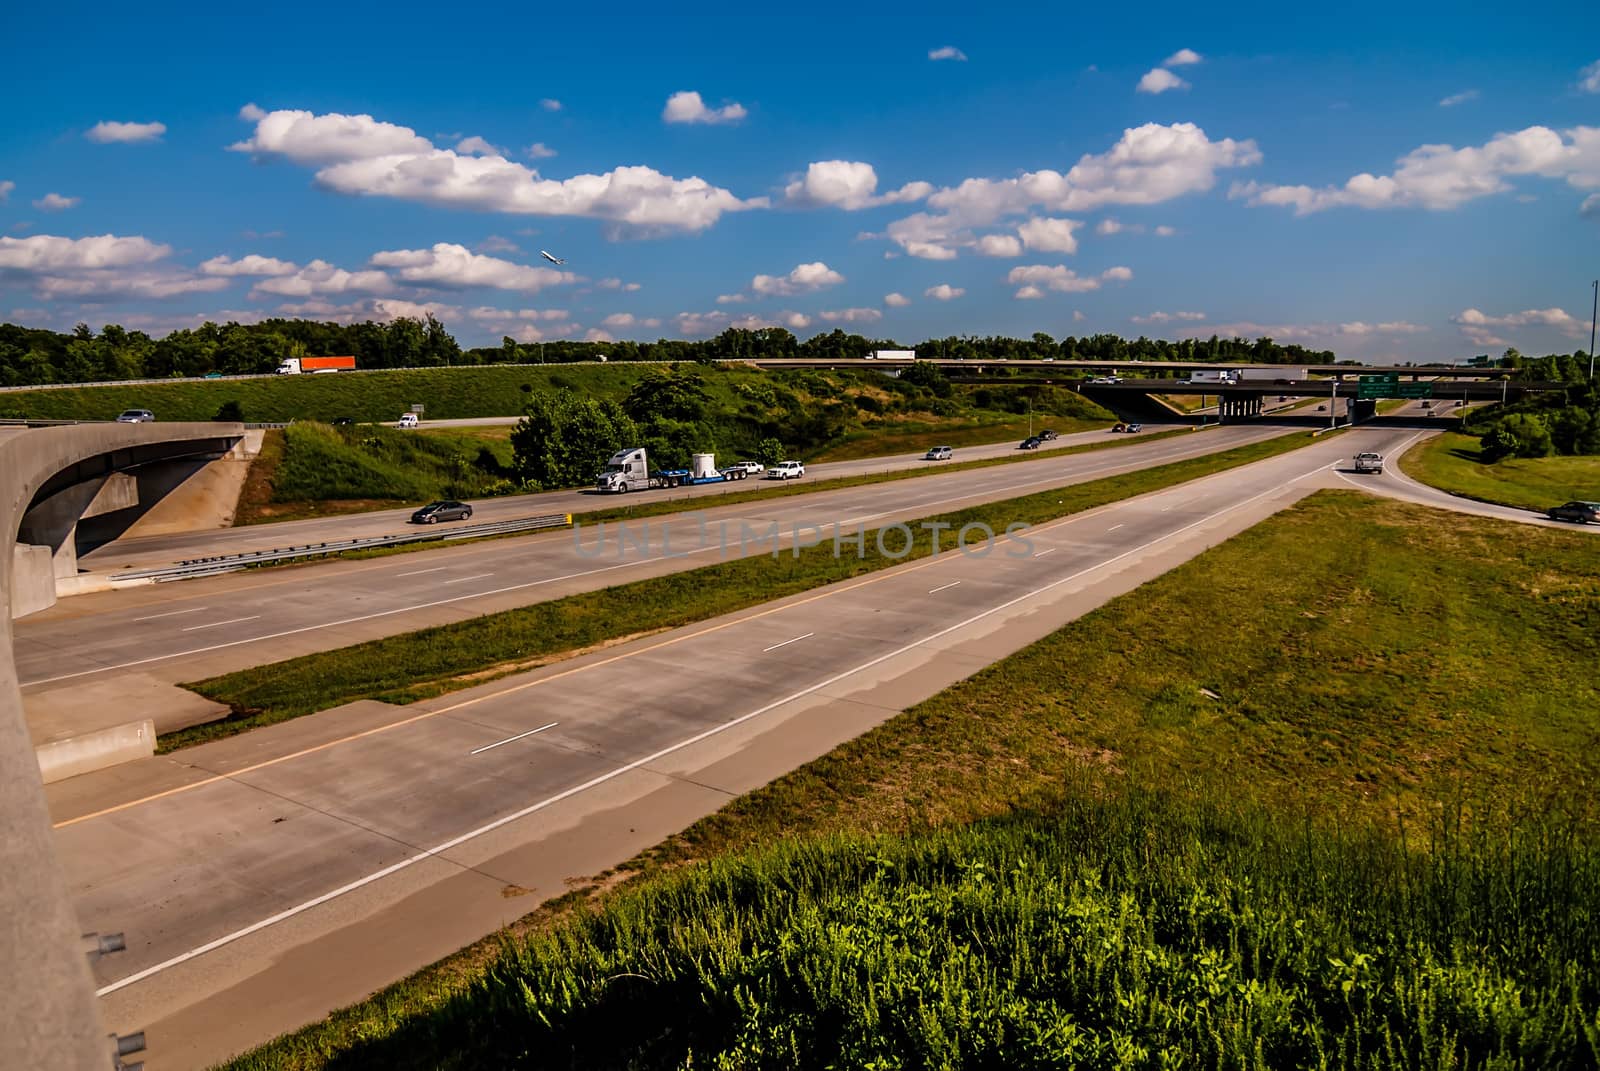 clover leaf exit ramps on highway near city by digidreamgrafix